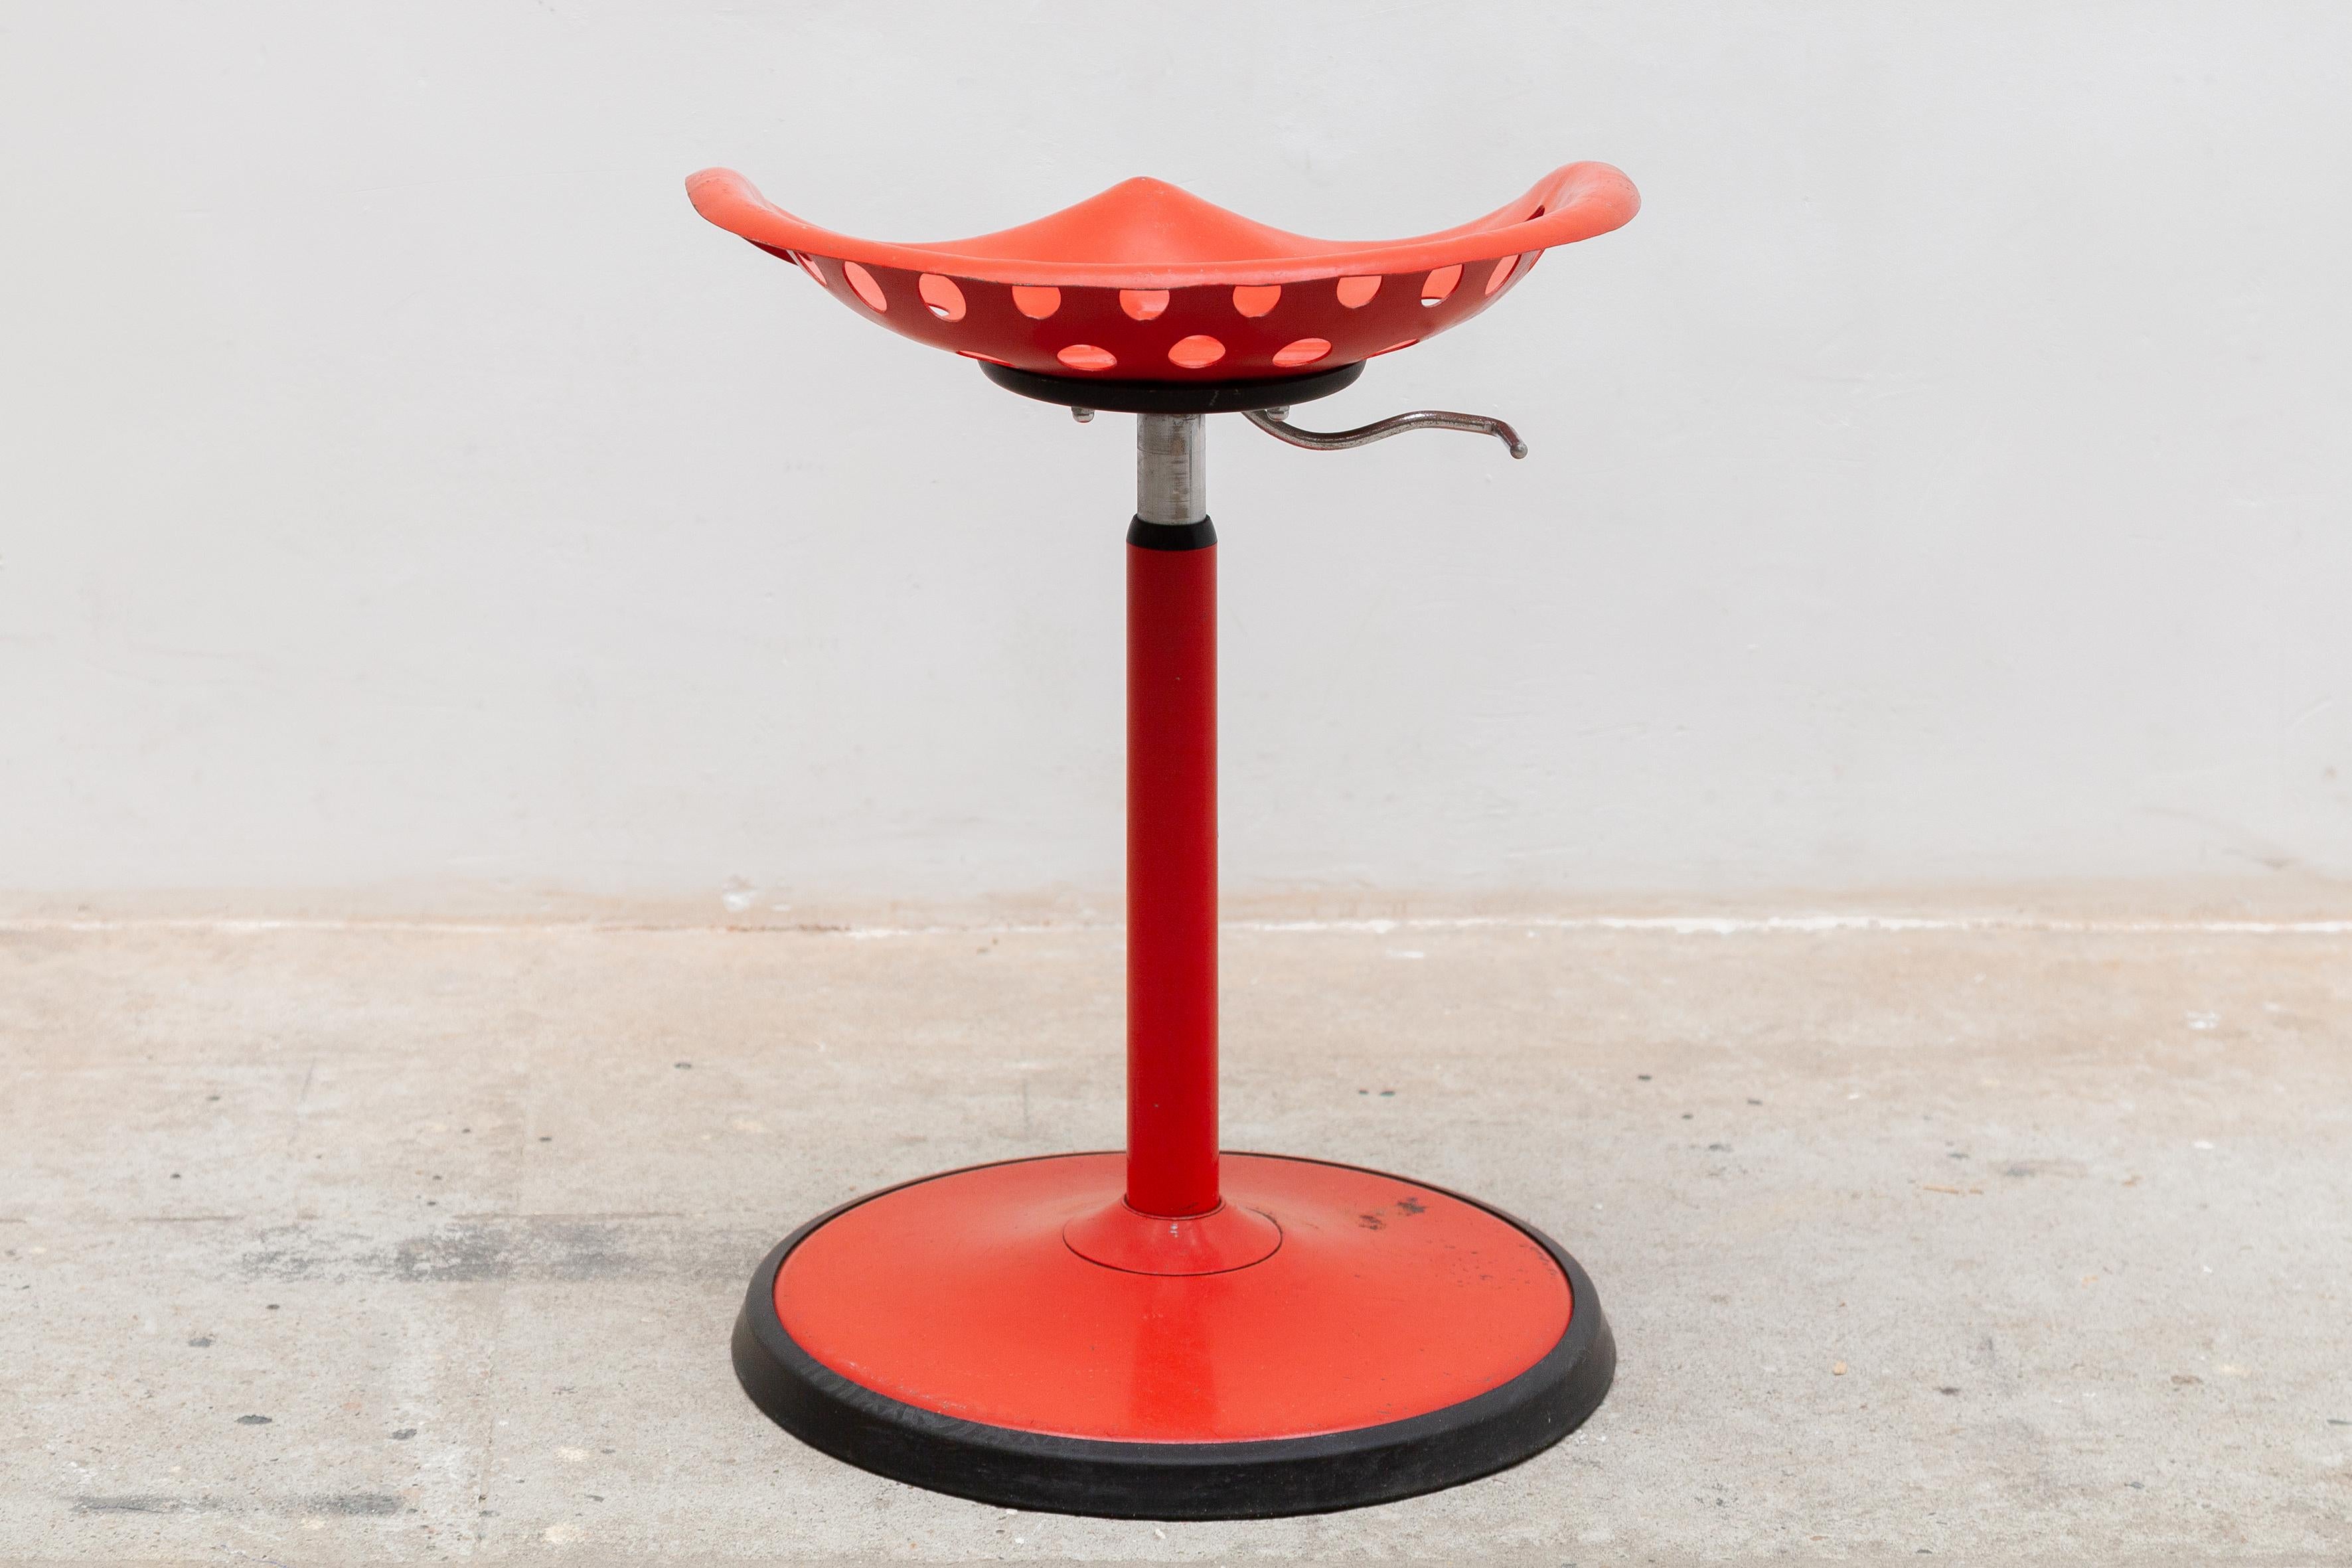 Metalwork Red Tractor Seat Stool Designed by Etienne Fermigier for Mirima, France